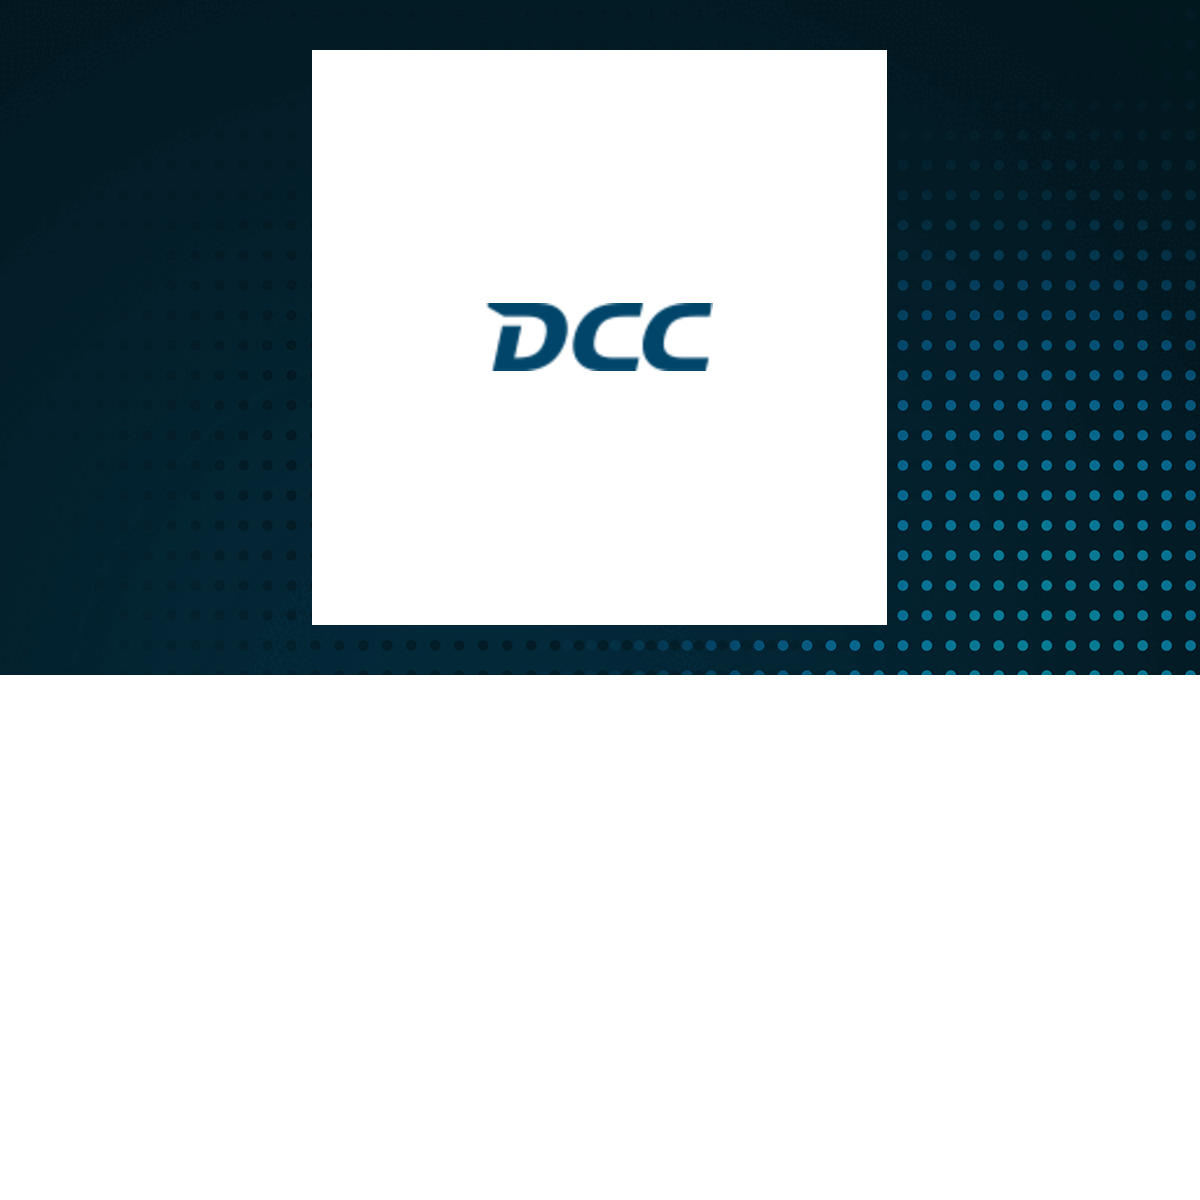 DCC logo with Energy background